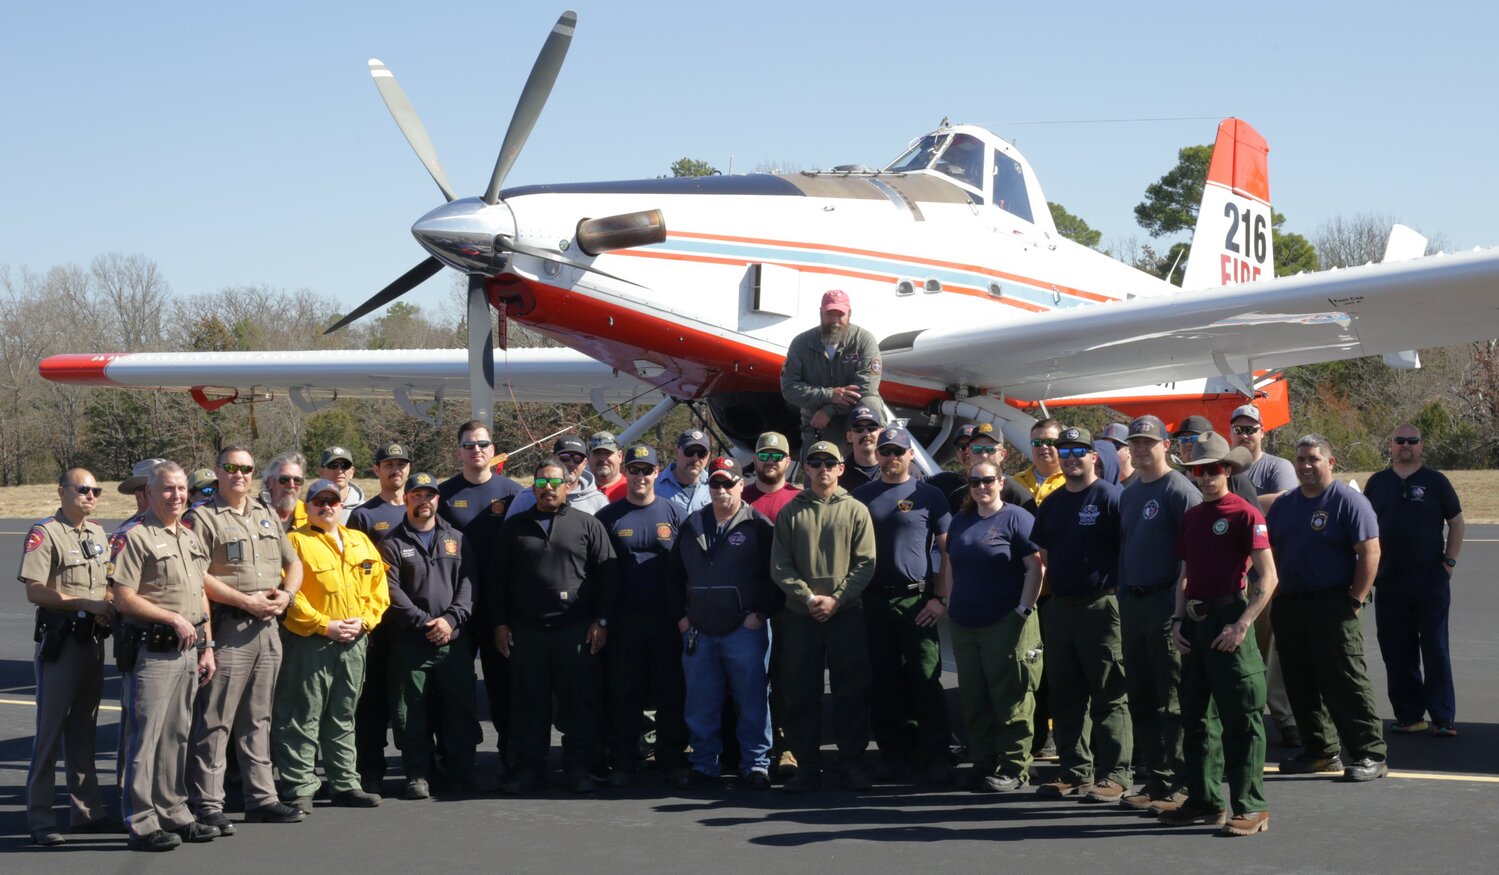 Area firefighters at the training session offered by Dauntless Air.